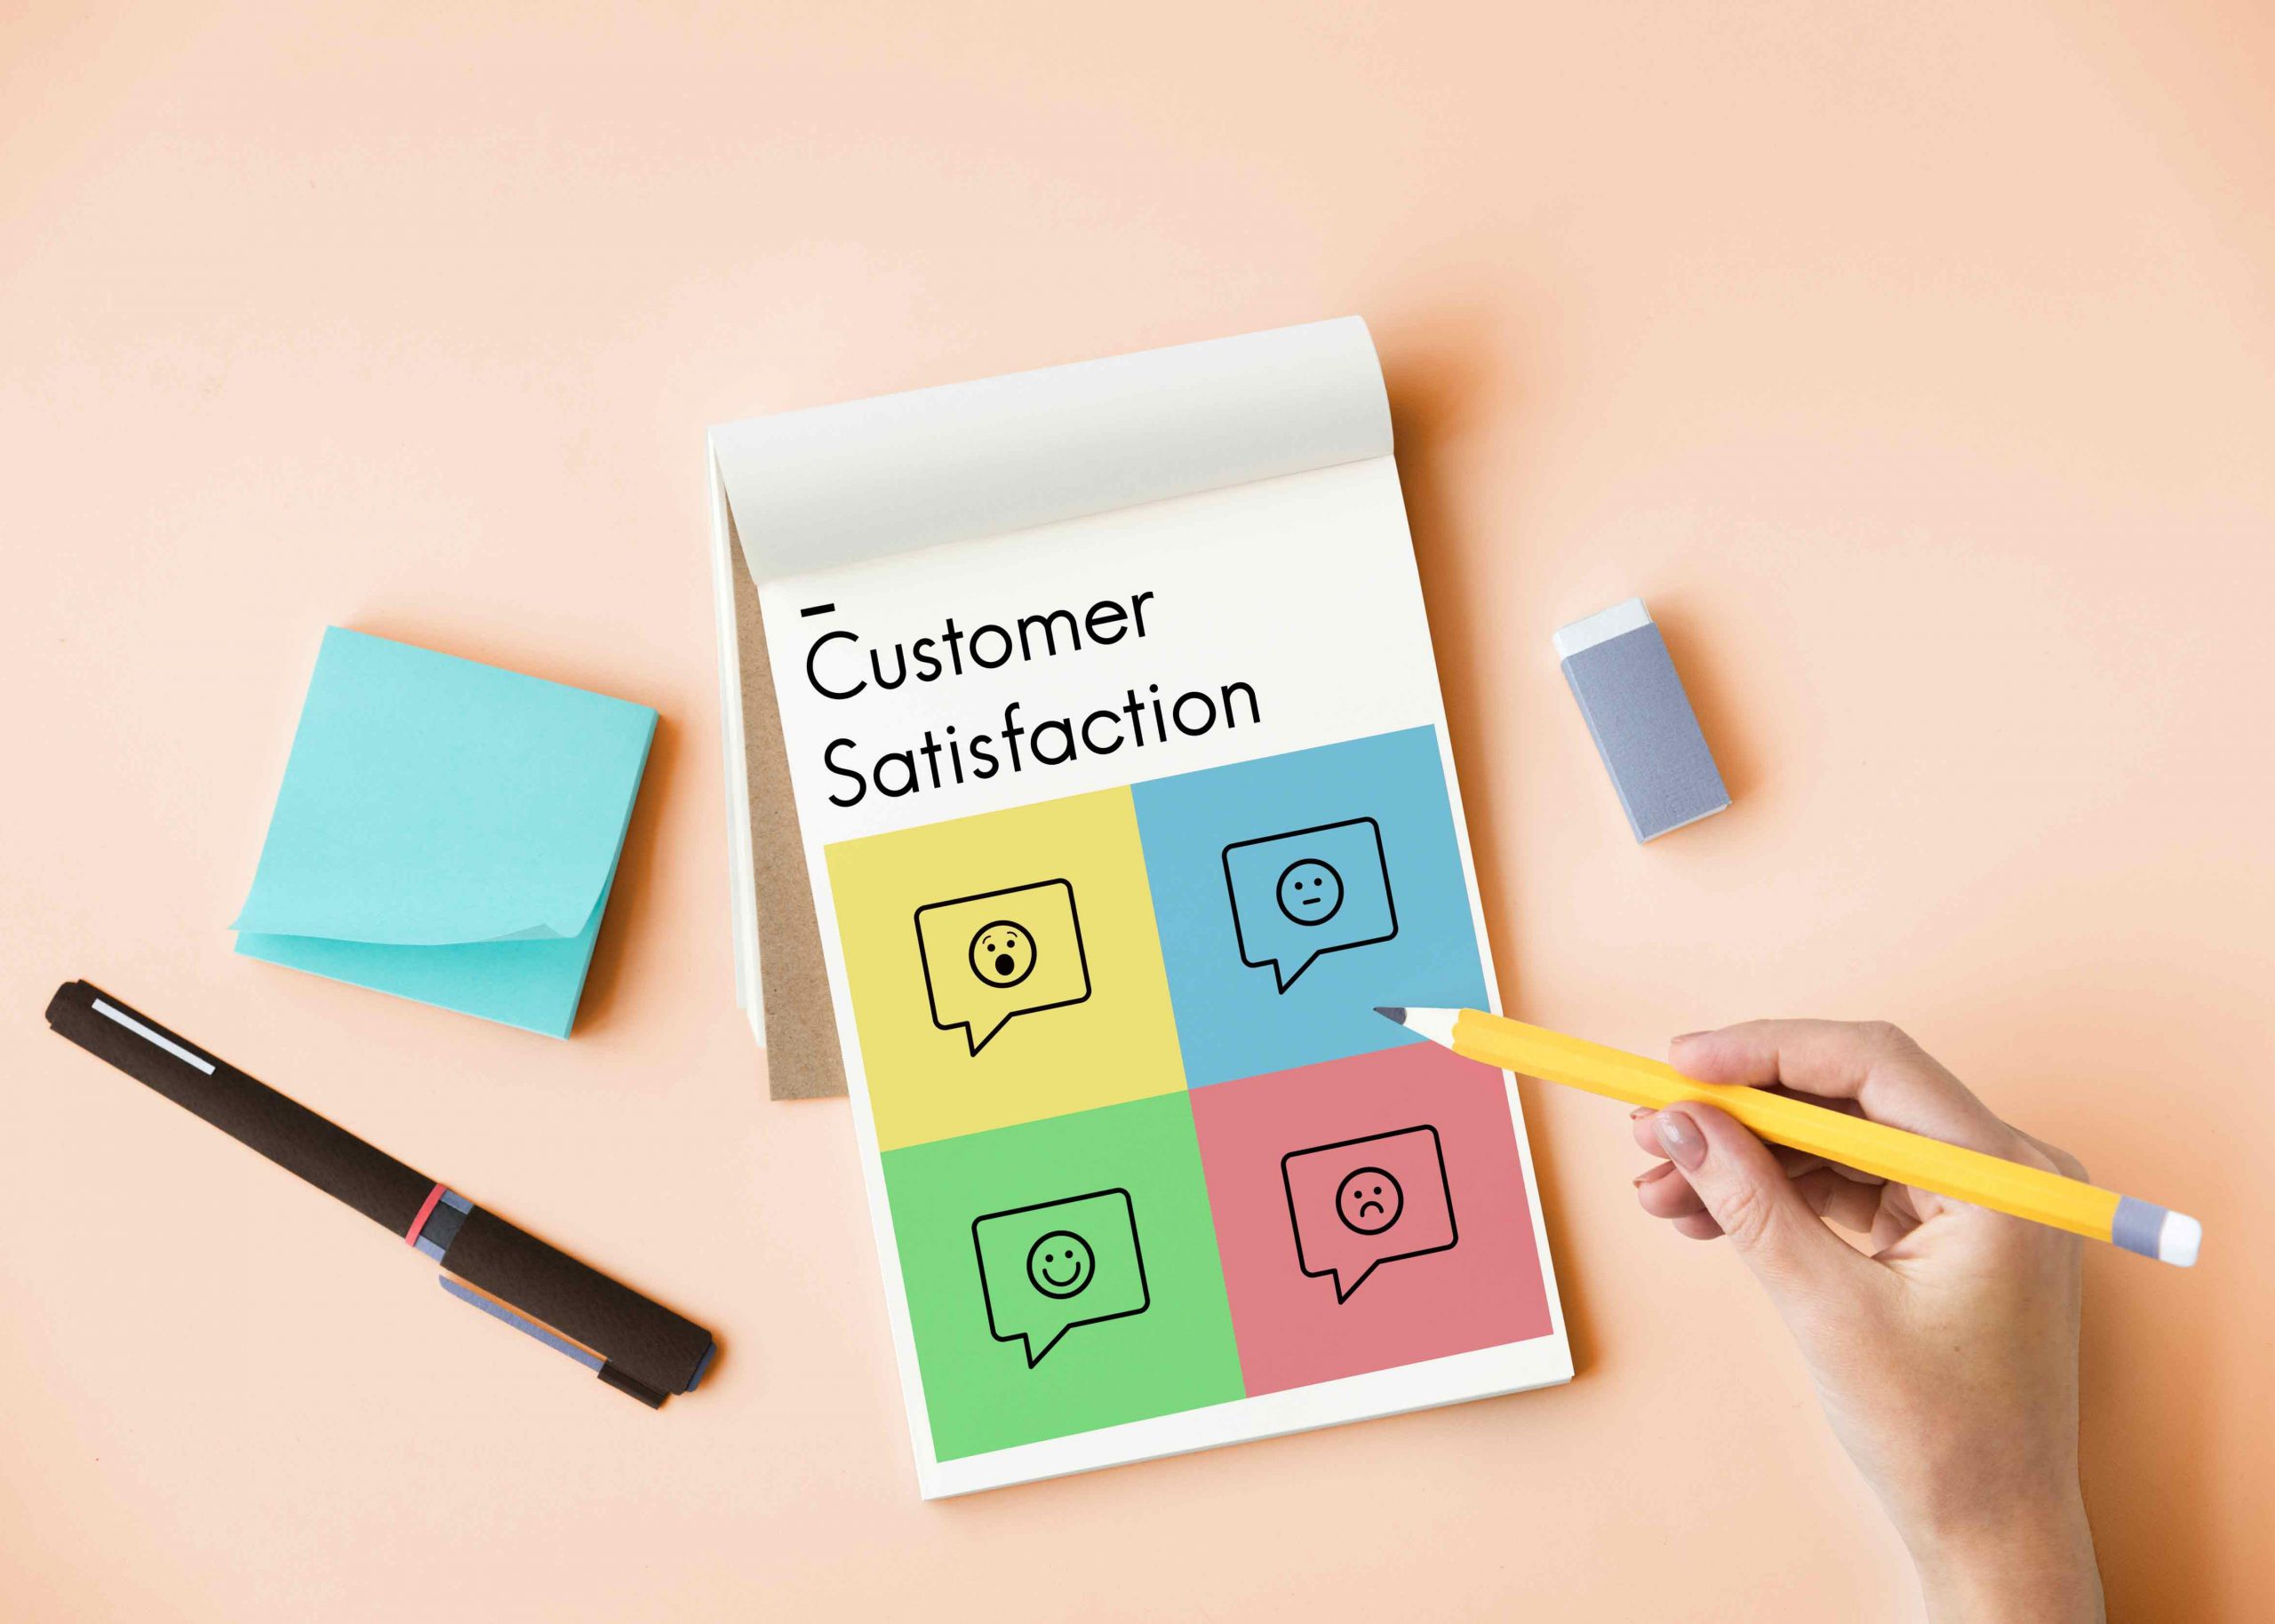 Customer Satisfaction research